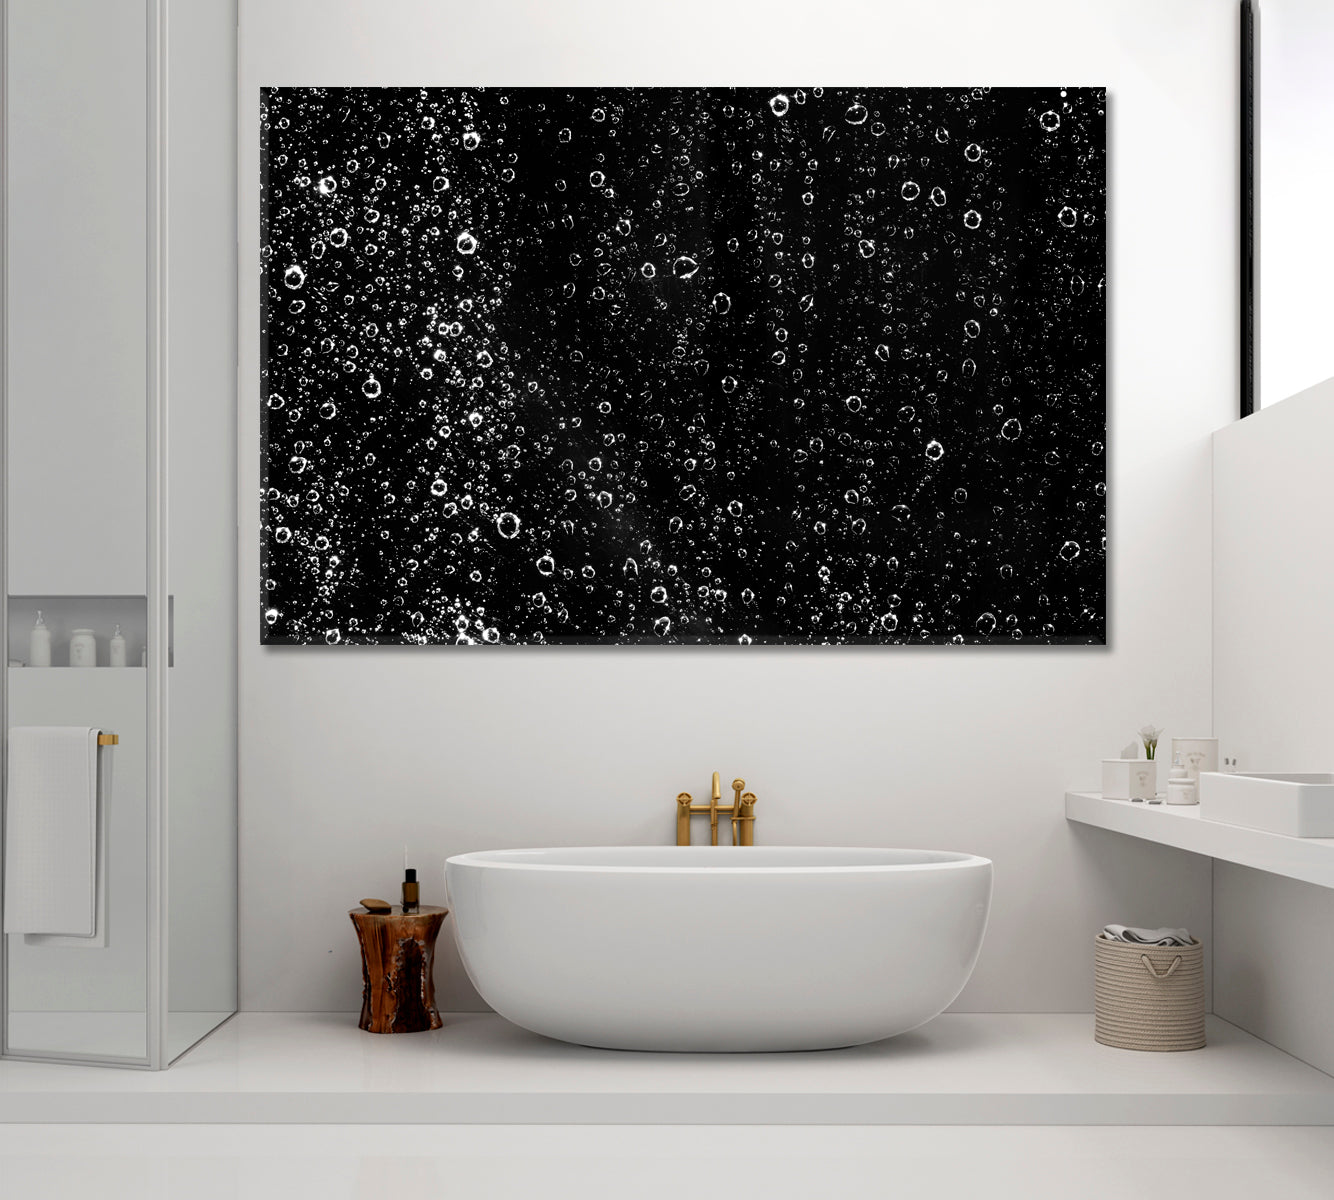 Bubbles in Dark Water Canvas Print ArtLexy 1 Panel 24"x16" inches 